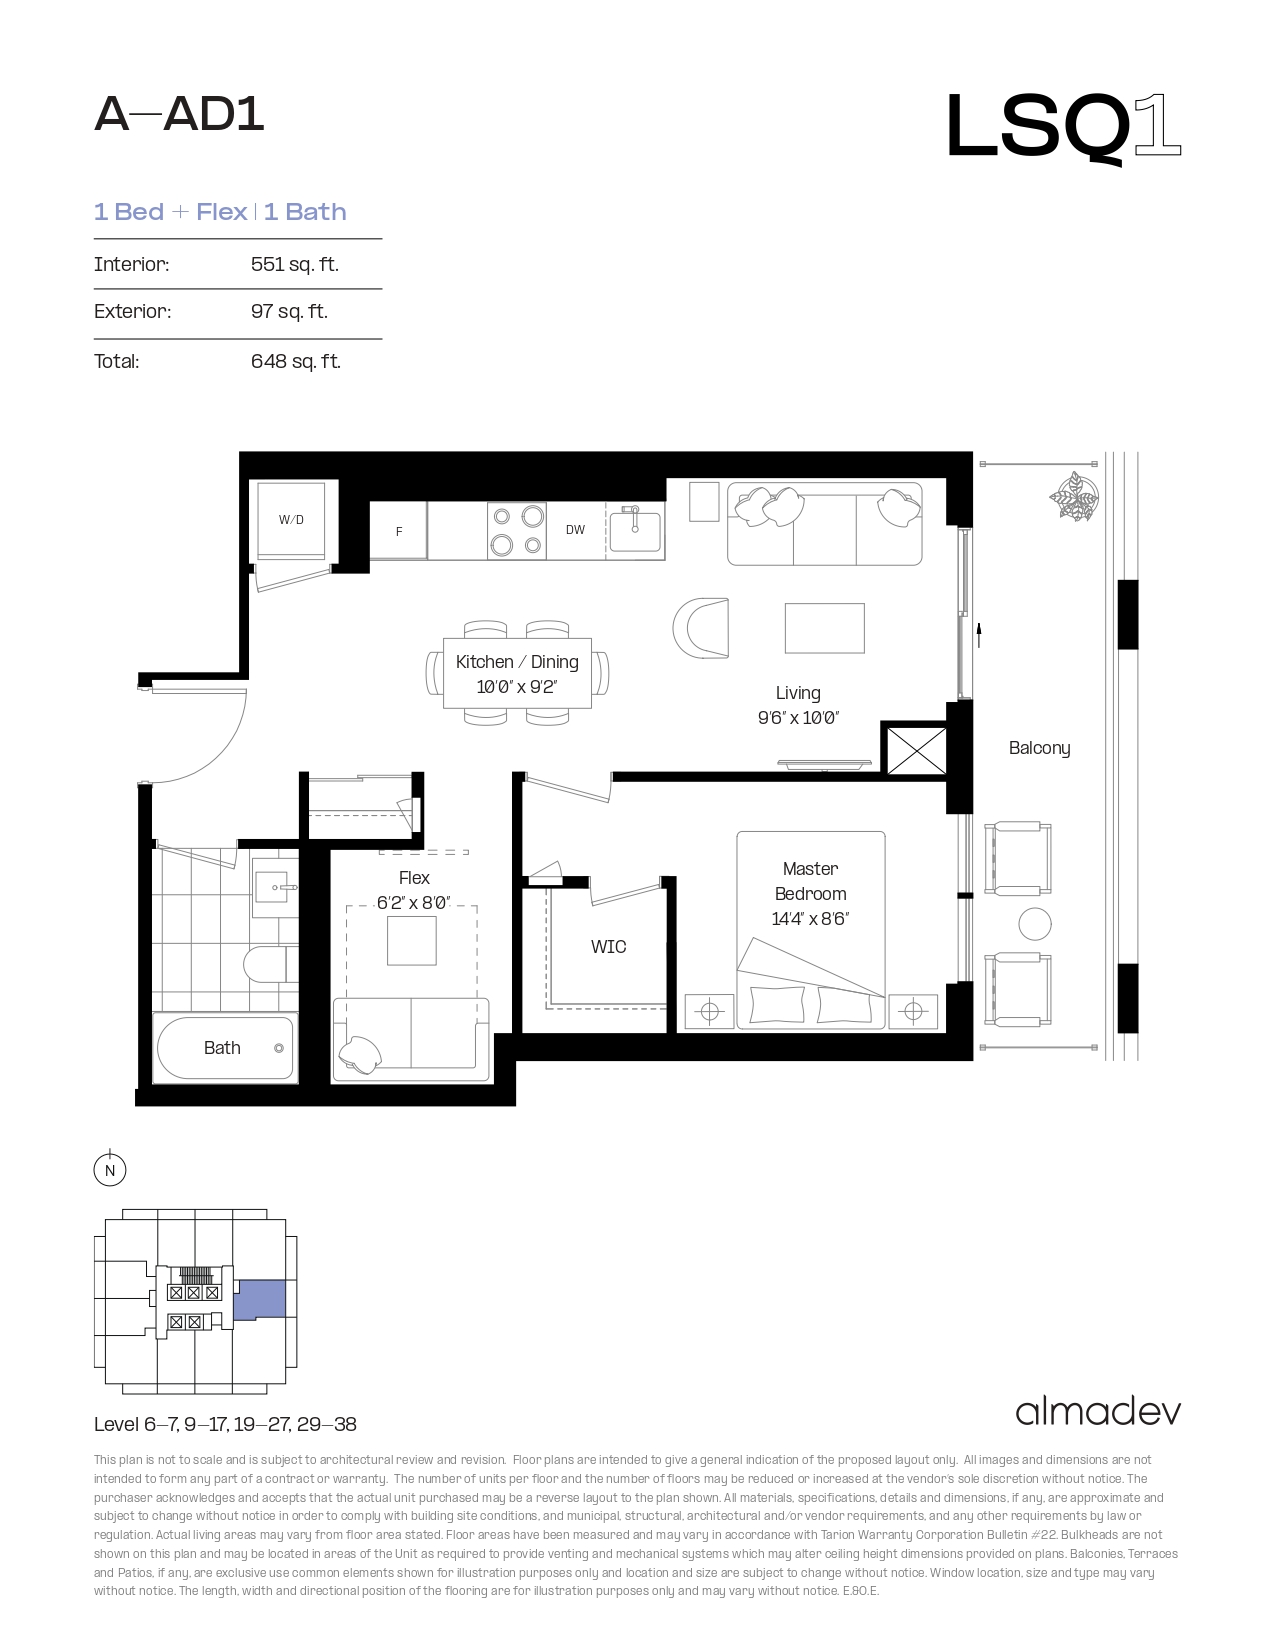 A-AD1 Floor Plan of LSQ Condos with undefined beds